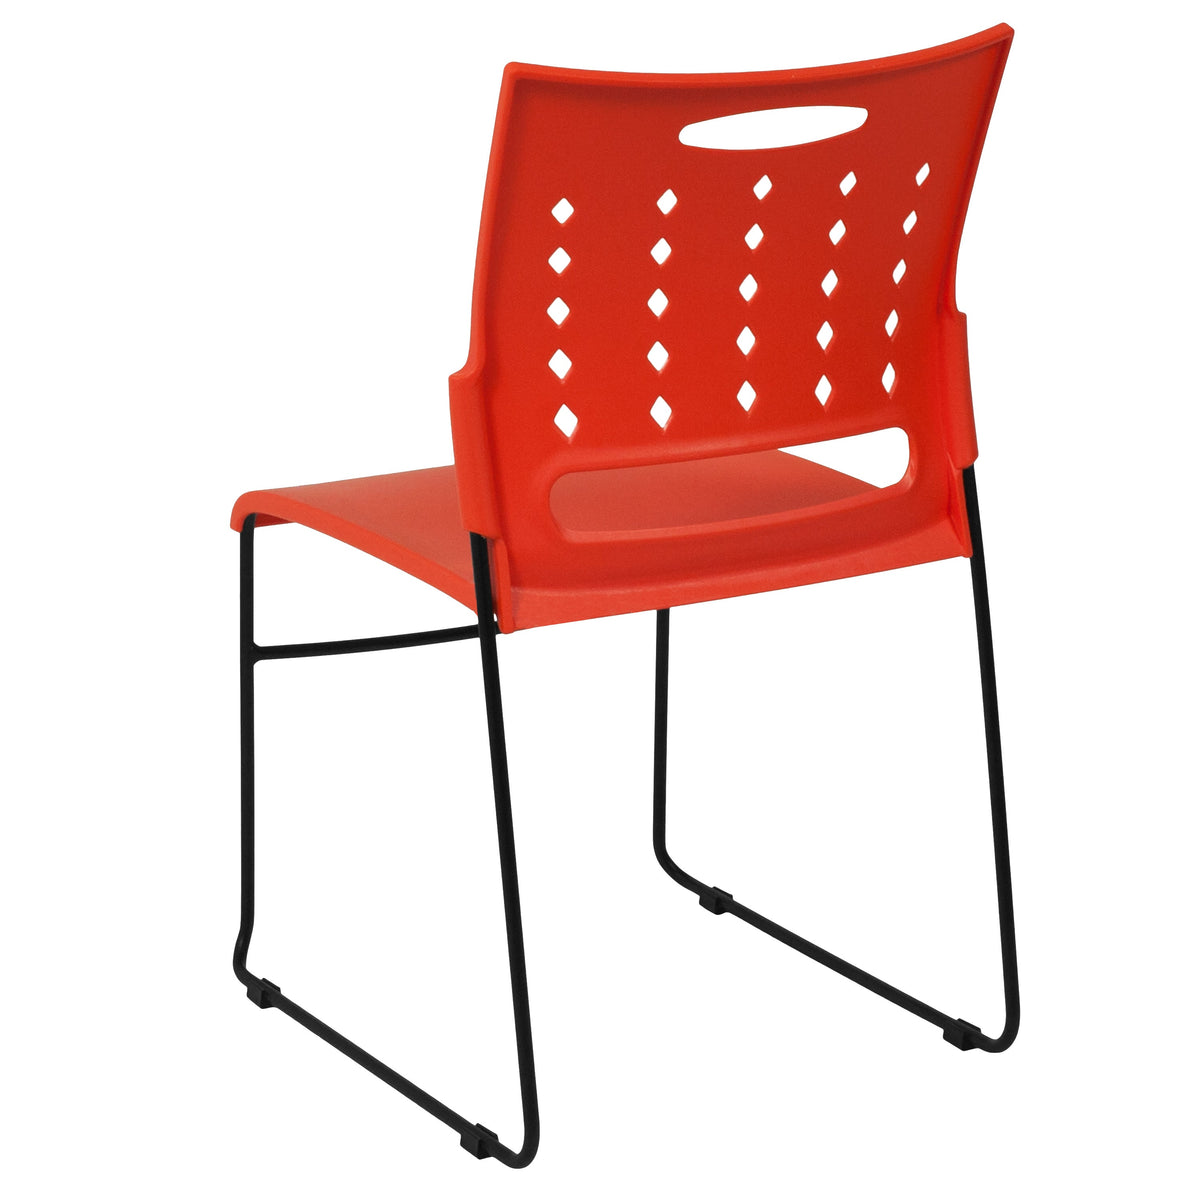 Orange |#| 881 lb. Capacity Orange Sled Base Stack Chair with Carry Handle & Air-Vent Back